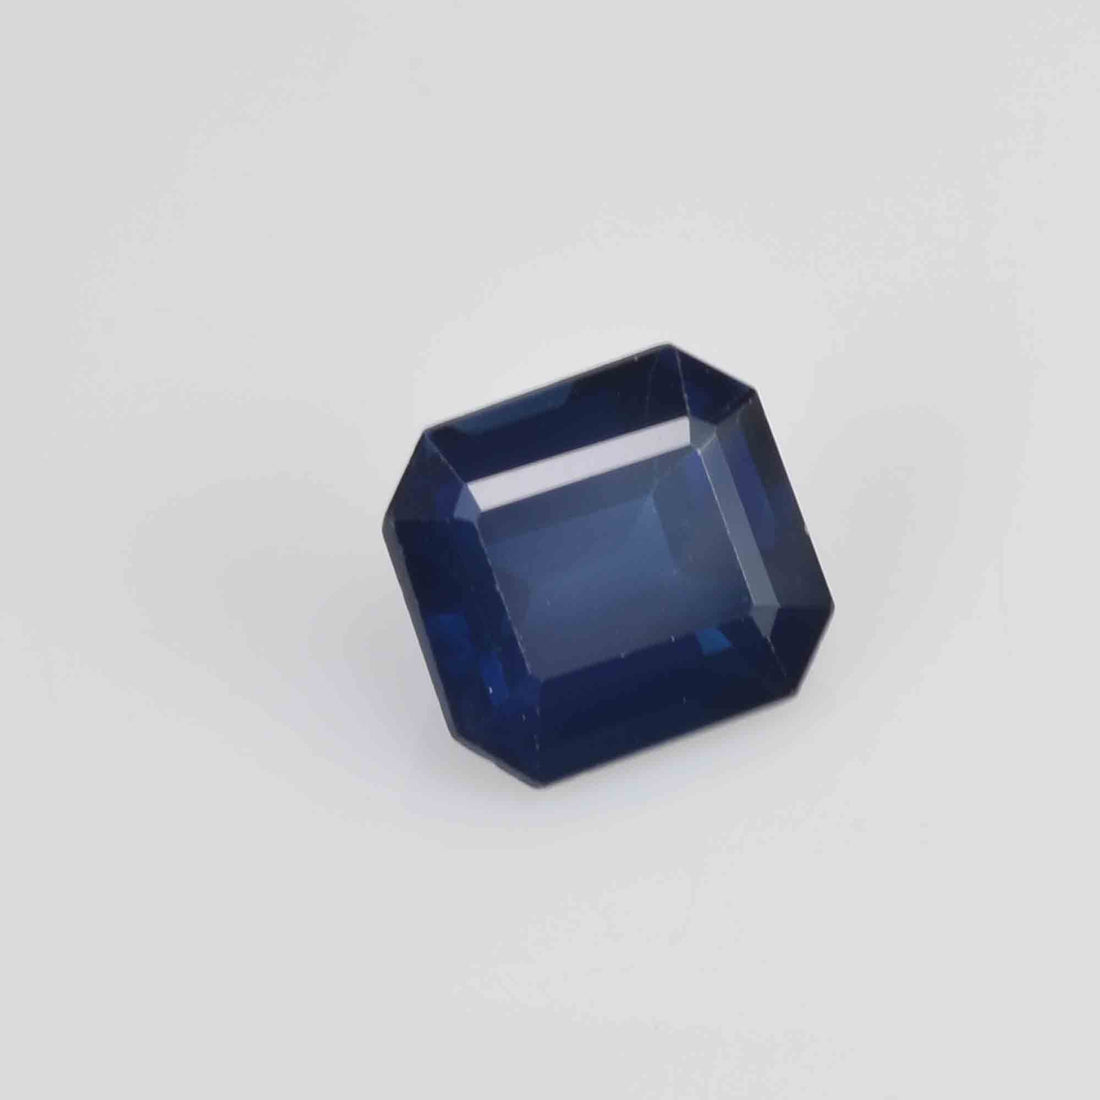 2.70 cts Natural Blue Sapphire Loose Gemstone Octagon Cut Certified